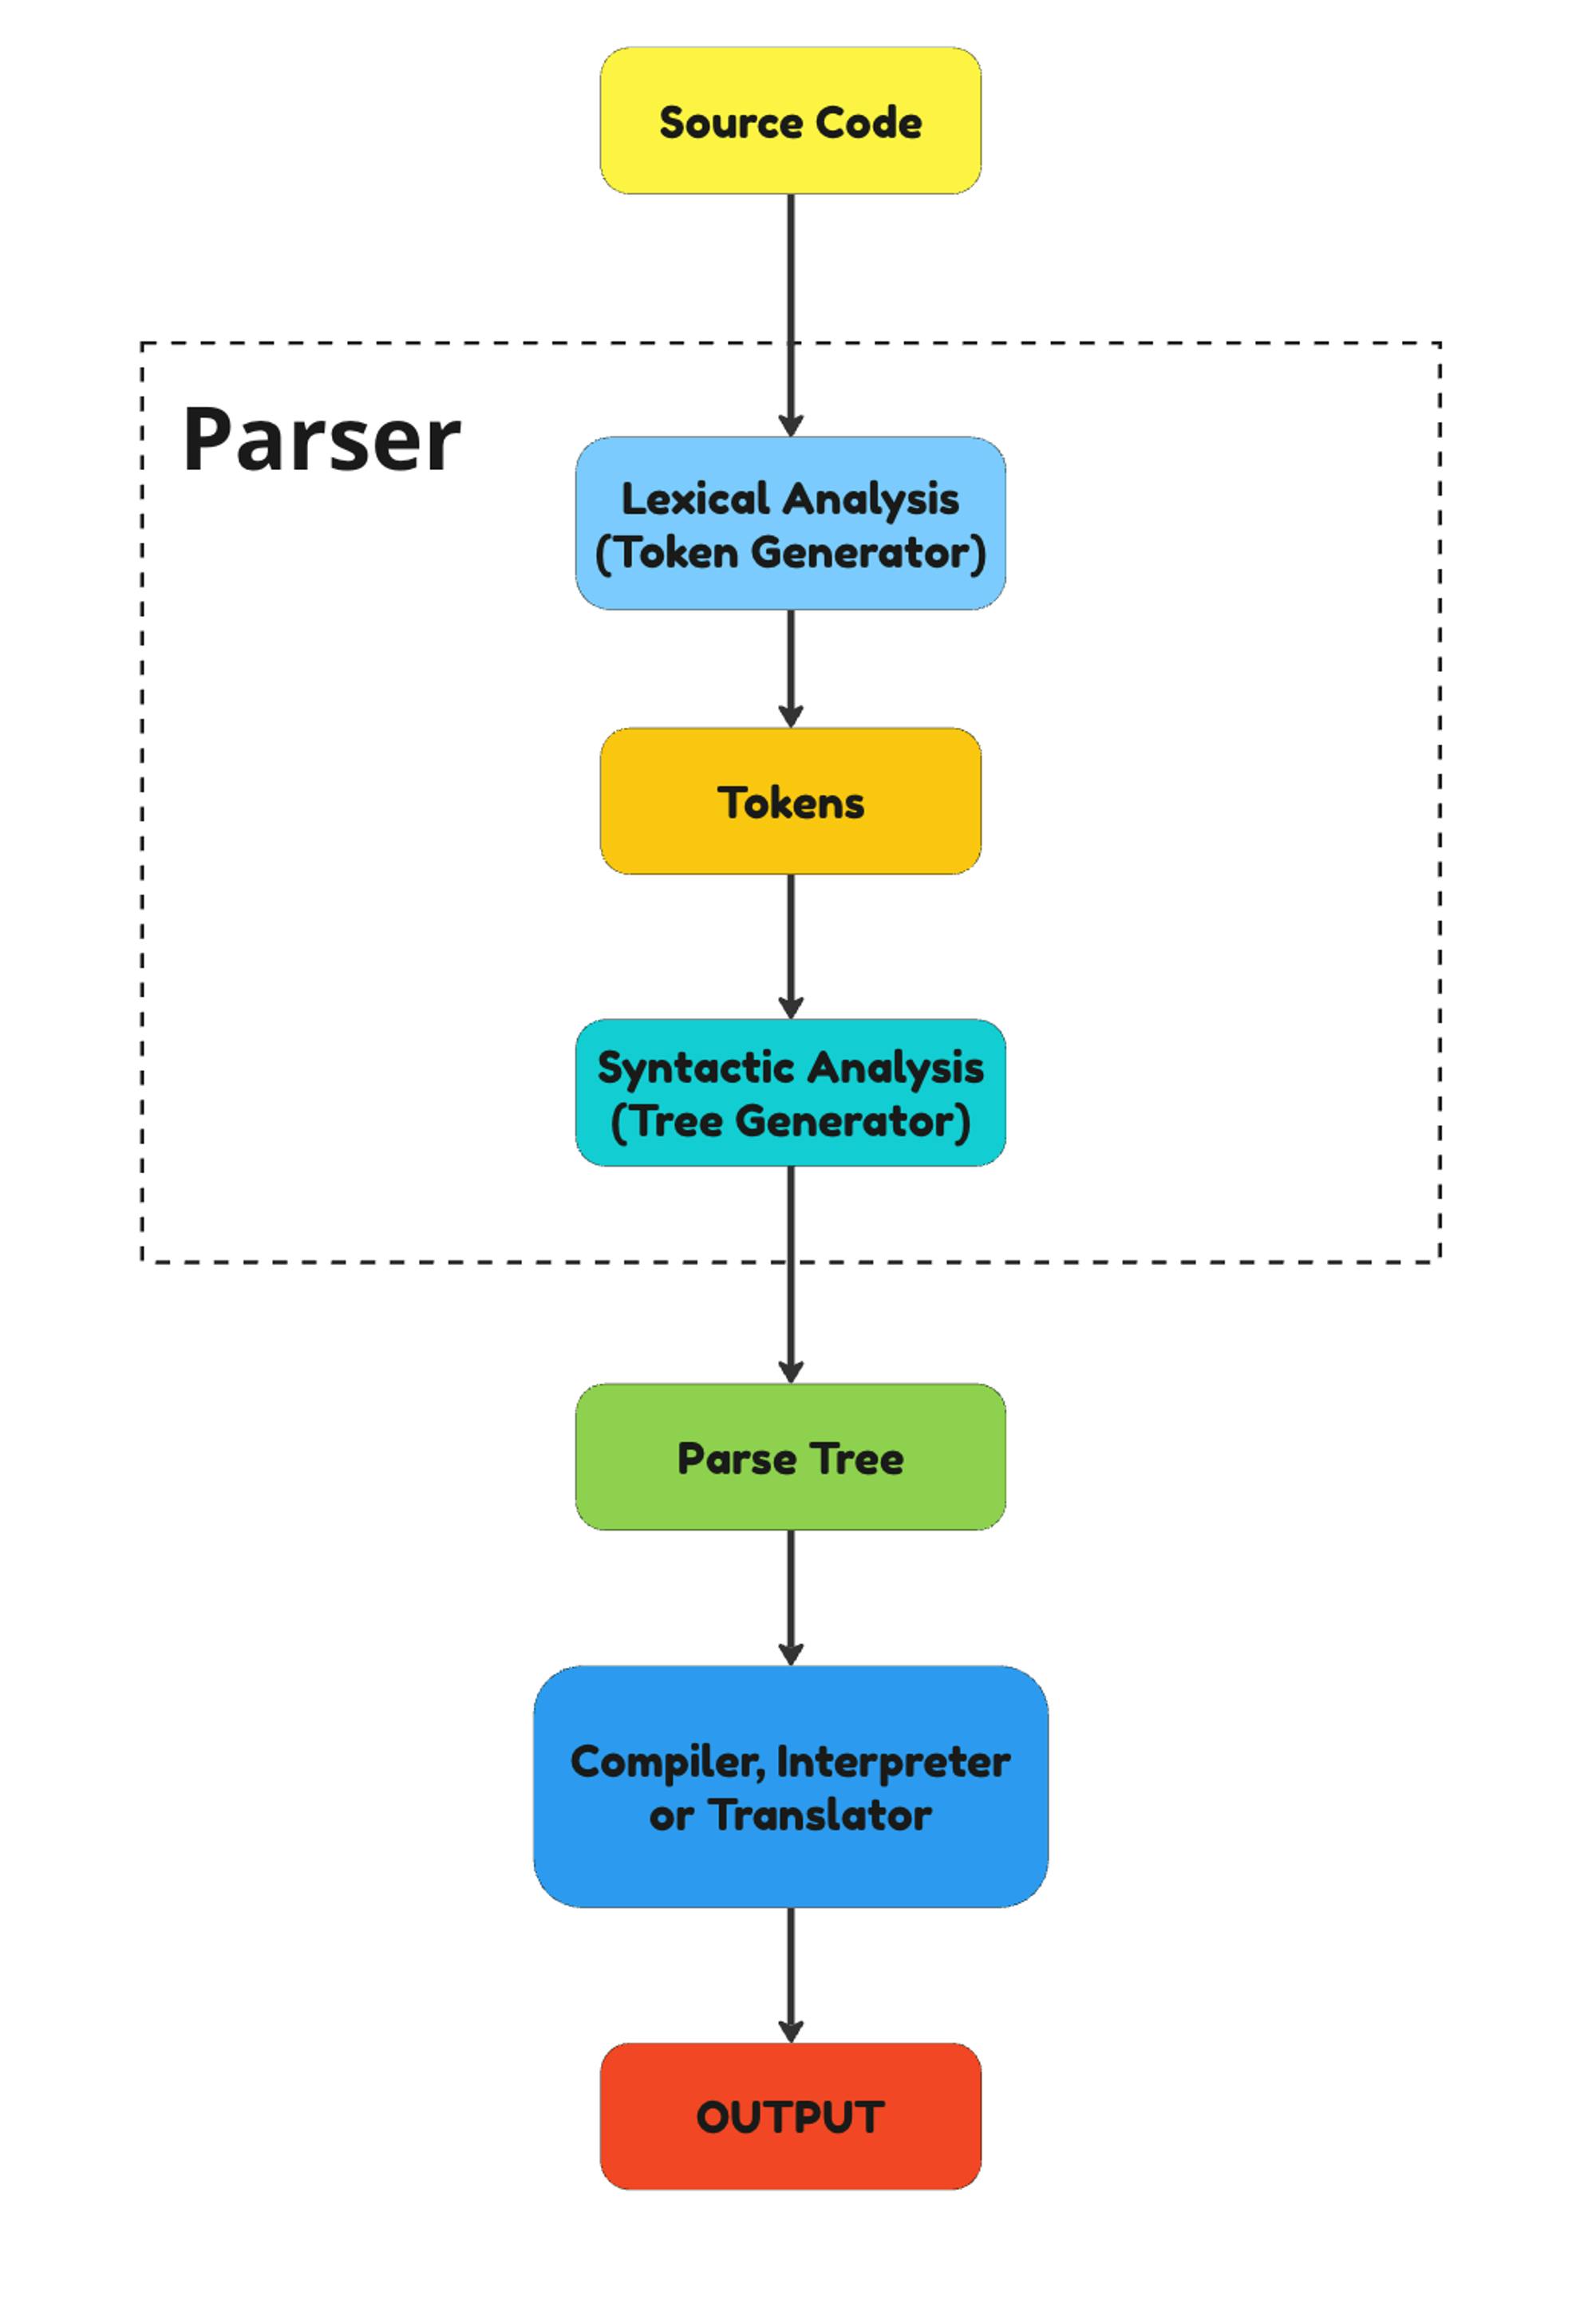 How does the parser work?